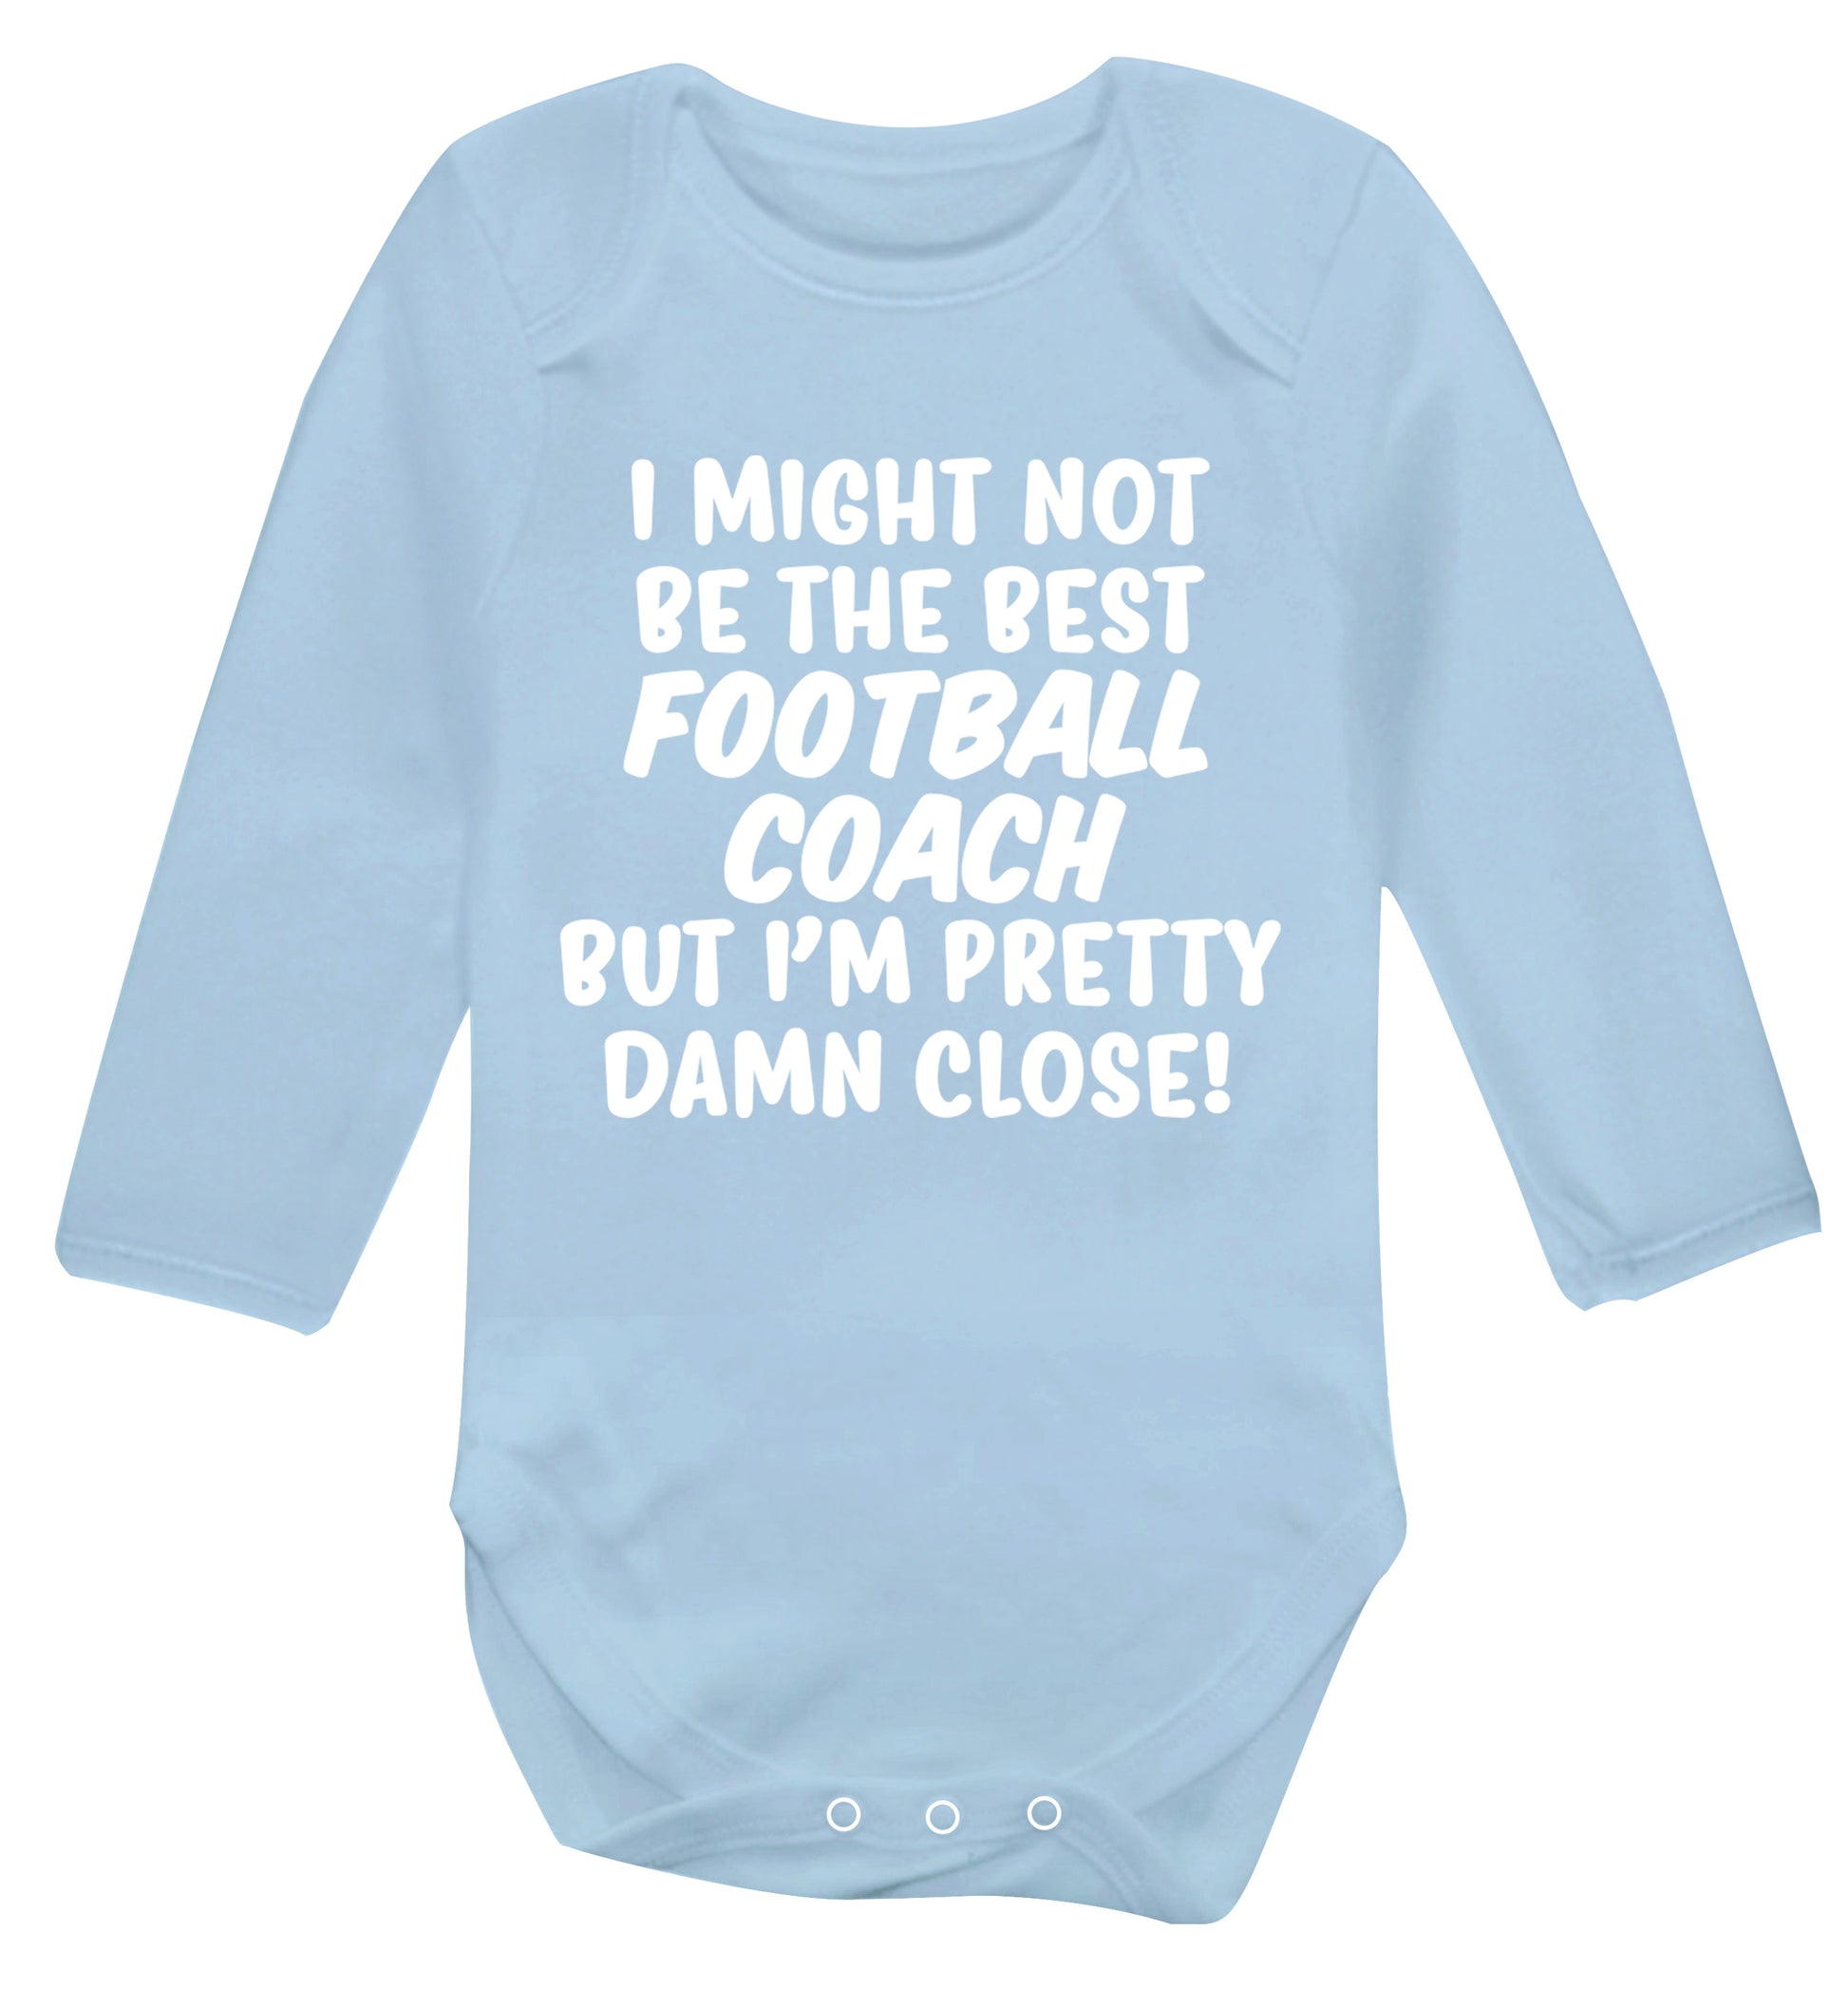 I might not be the best football coach but I'm pretty close! Baby Vest long sleeved pale blue 6-12 months